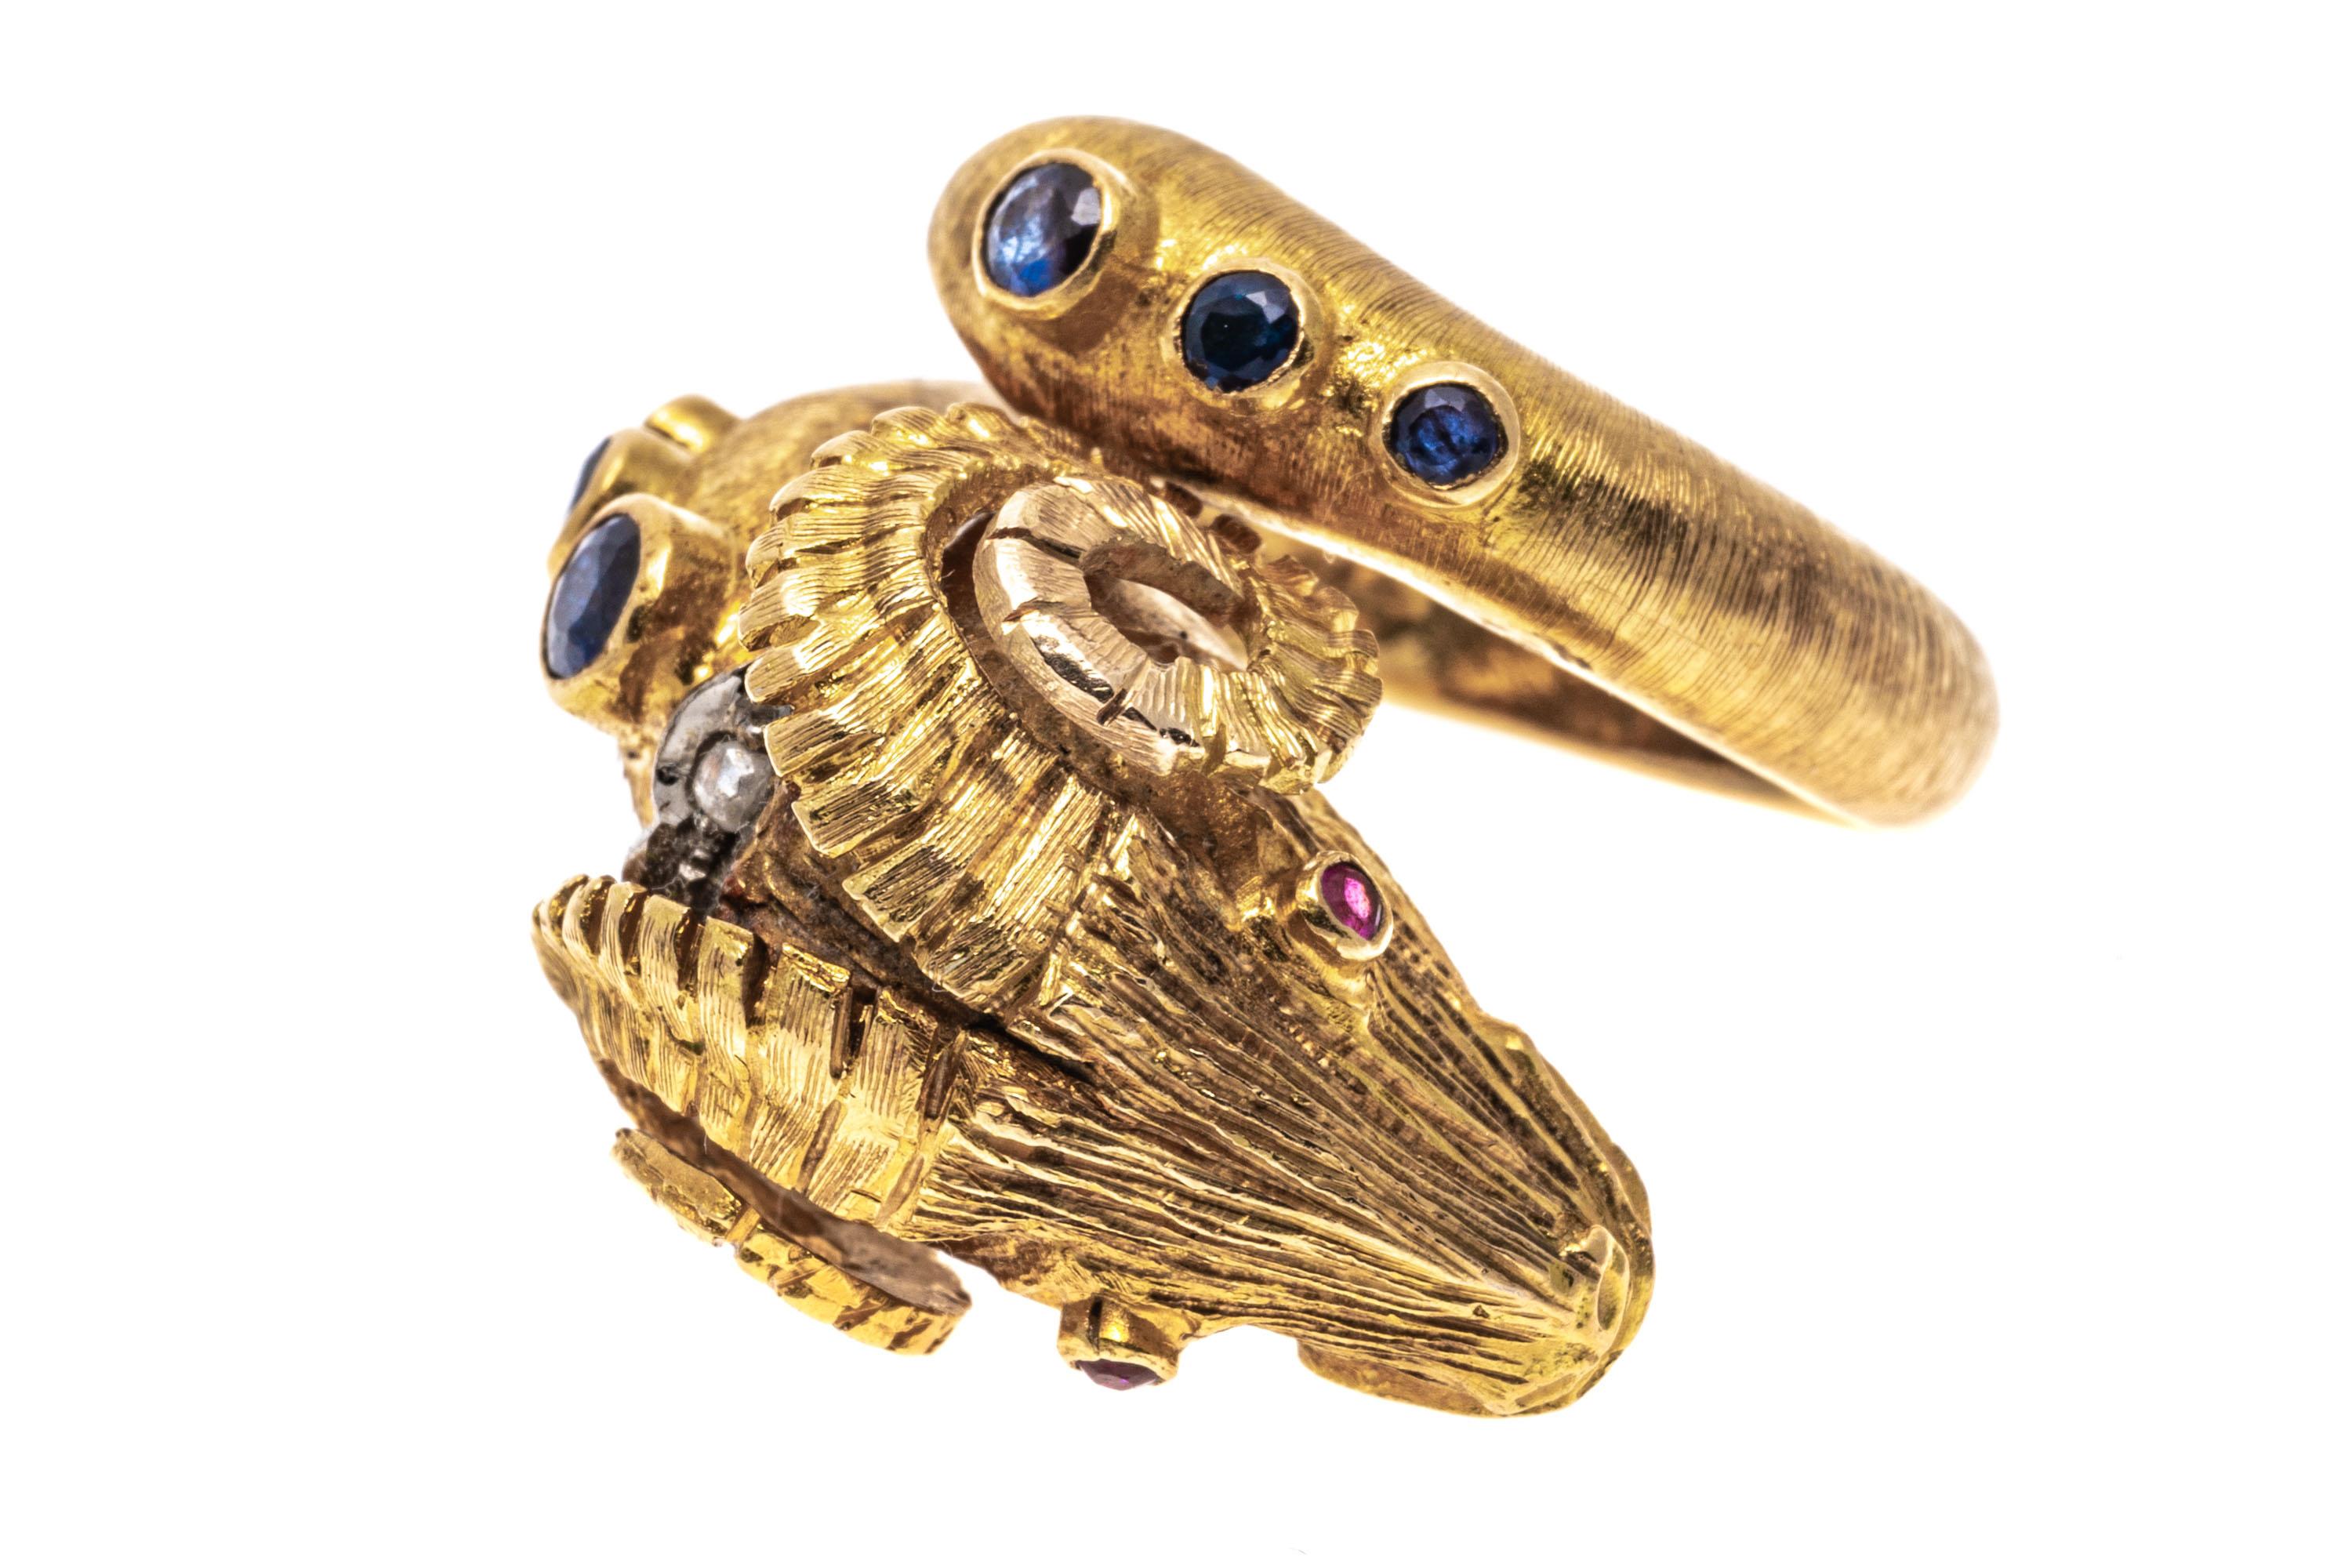 14k Yellow Gold Rams Head Ring With Sapphires, Rubies And Diamonds, Size 7-8 For Sale 6